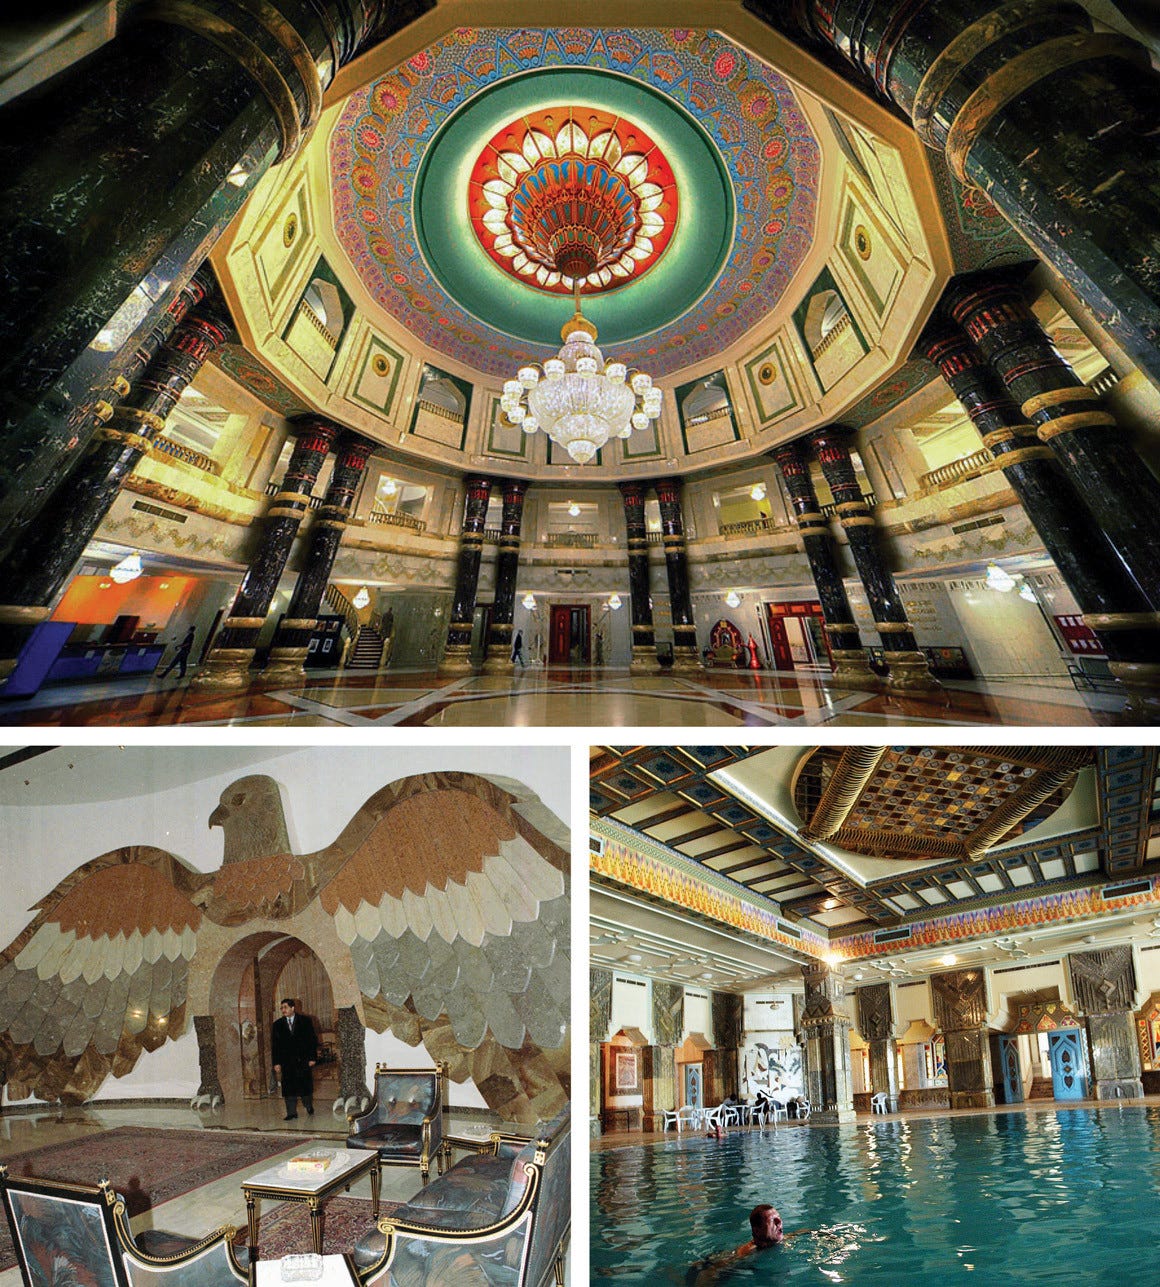 SADDAM HUSSEIN: The Iraqi president had dozens of palaces, villas, mansions and compounds around the country—many of which were converted into military outposts after the 2003 U.S. invasion. At top: the Al Faw palace in Baghdad; bottom left: a marble falcon in Baghdad; bottom right: a U.S. soldier swimming in a Tikrit palace in 2003, shortly after Hussein’s ouster.